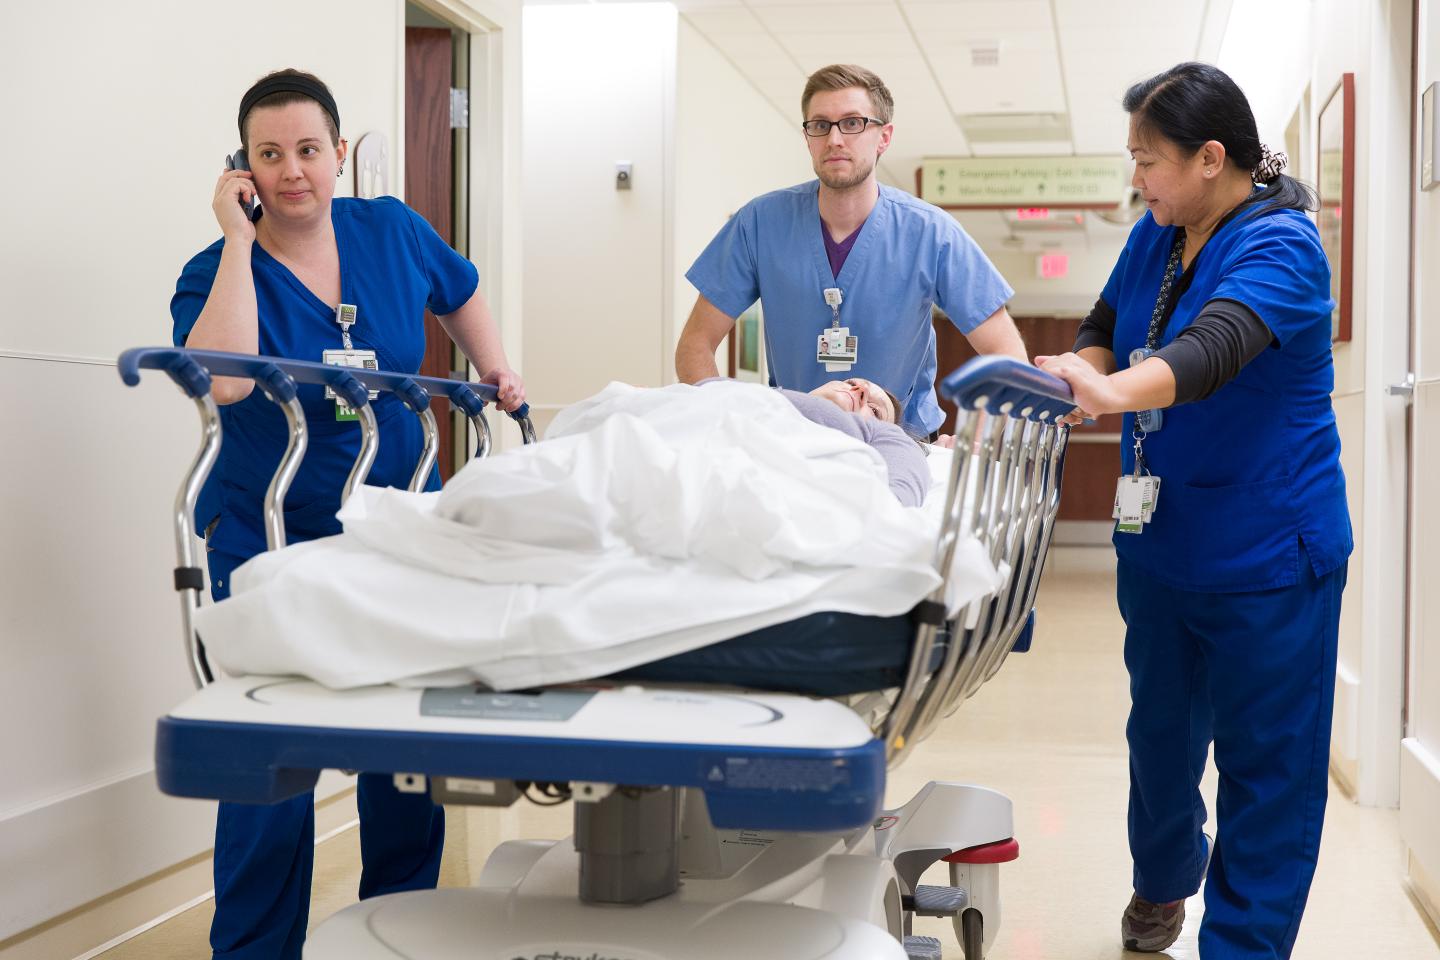 Awareness Needed for Nurses Caring for Transgender Patients in Emergency Departments